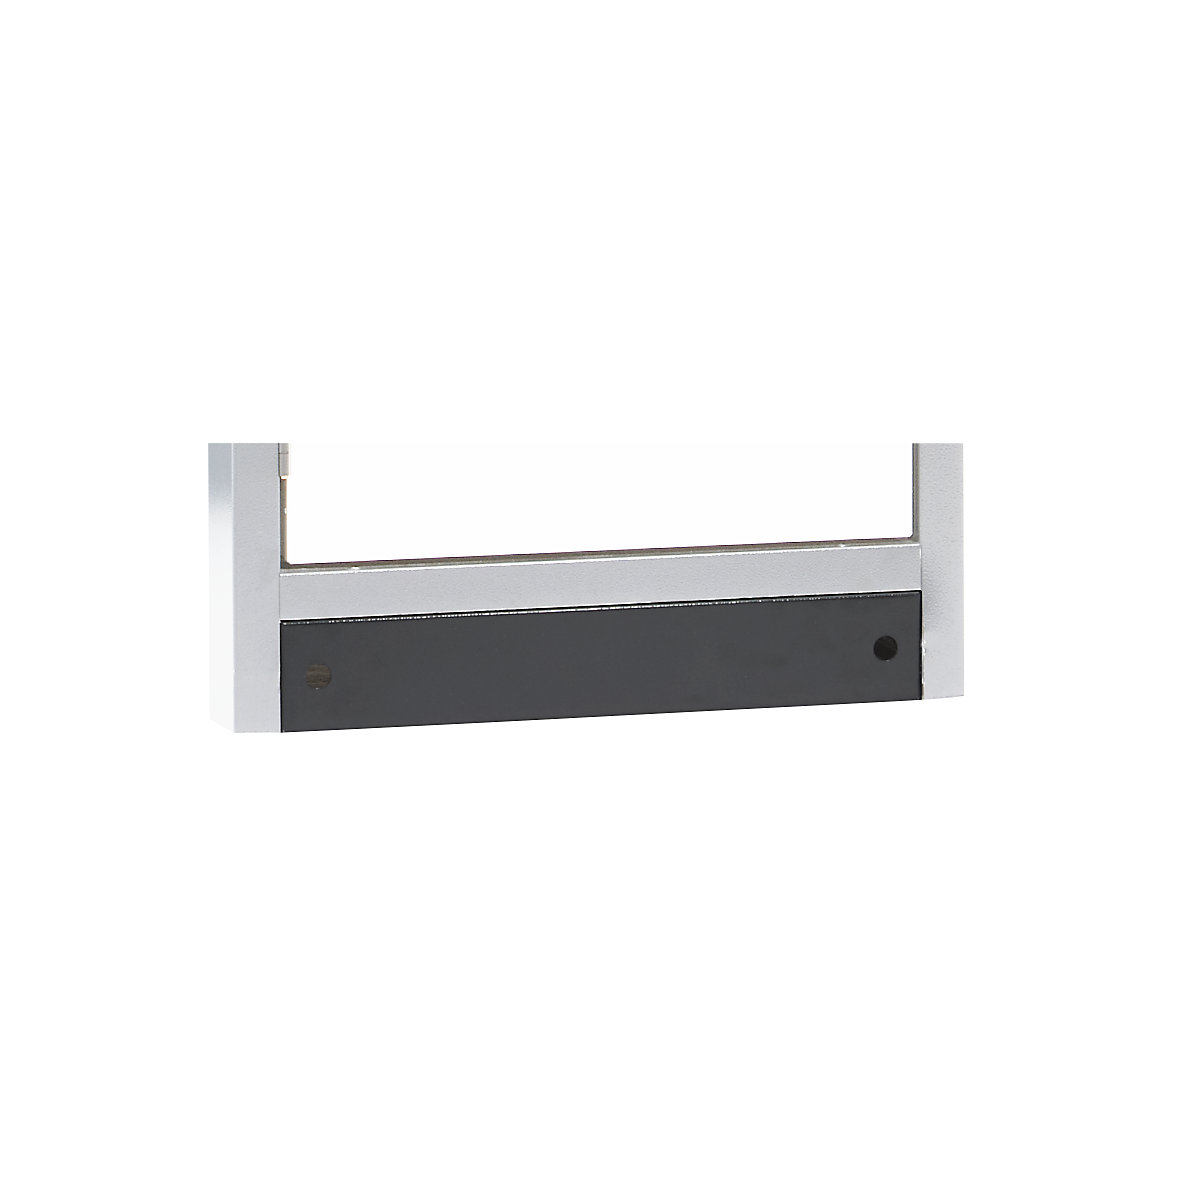 Plinth cover plate – asecos